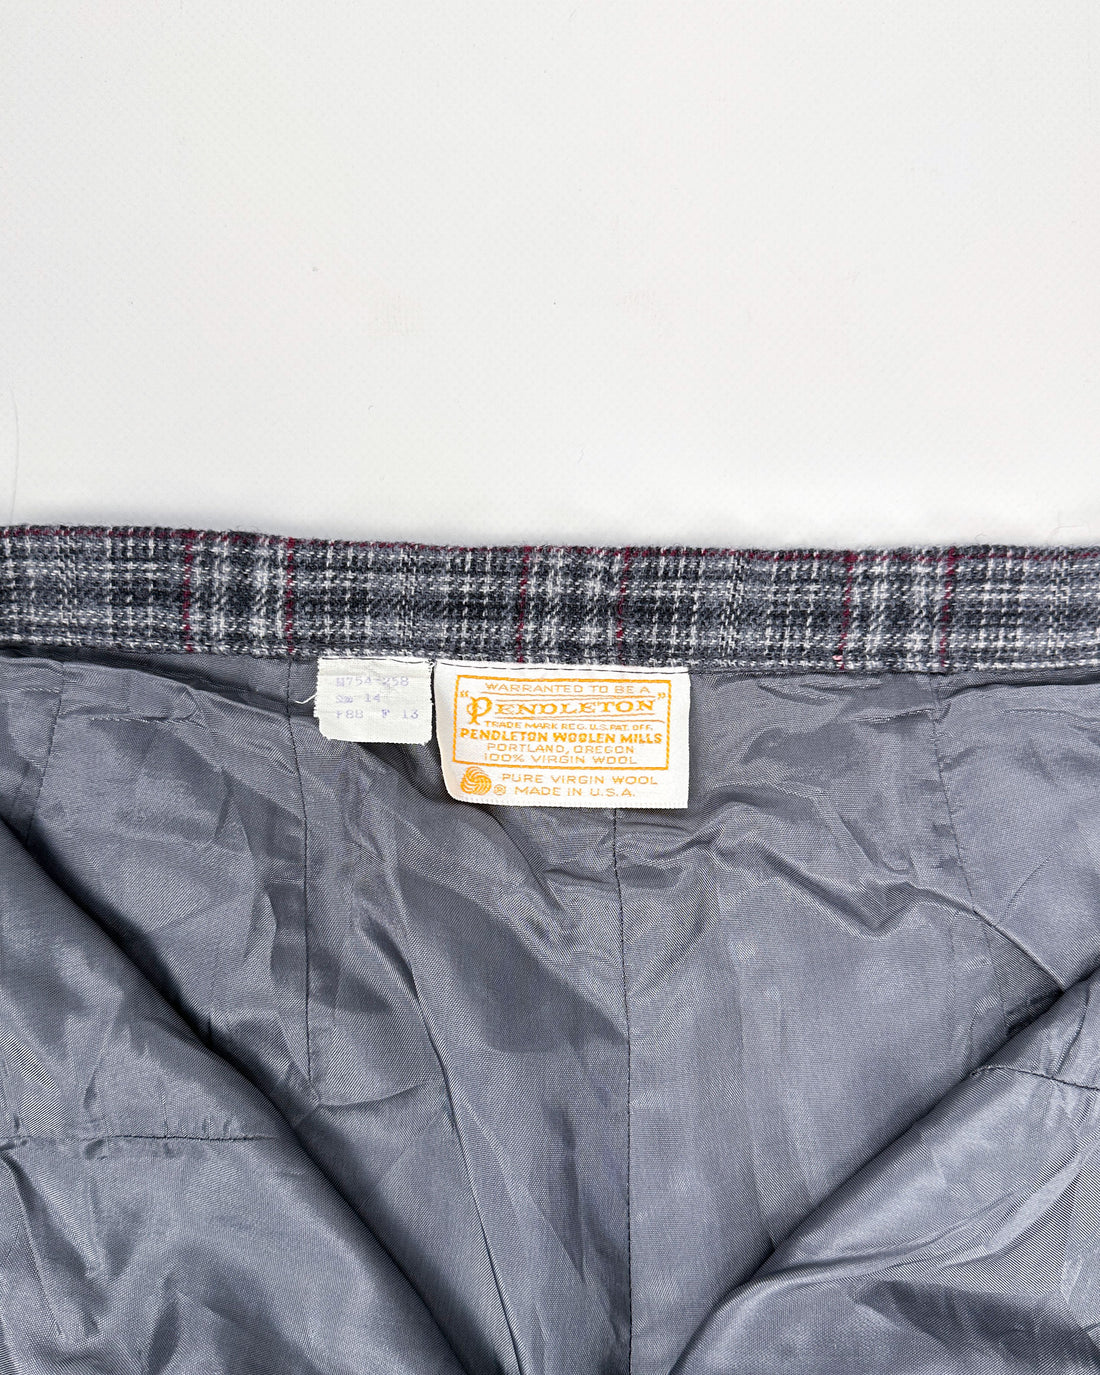 Pendleton Checkered Wool Pants (Made in USA) 1990's